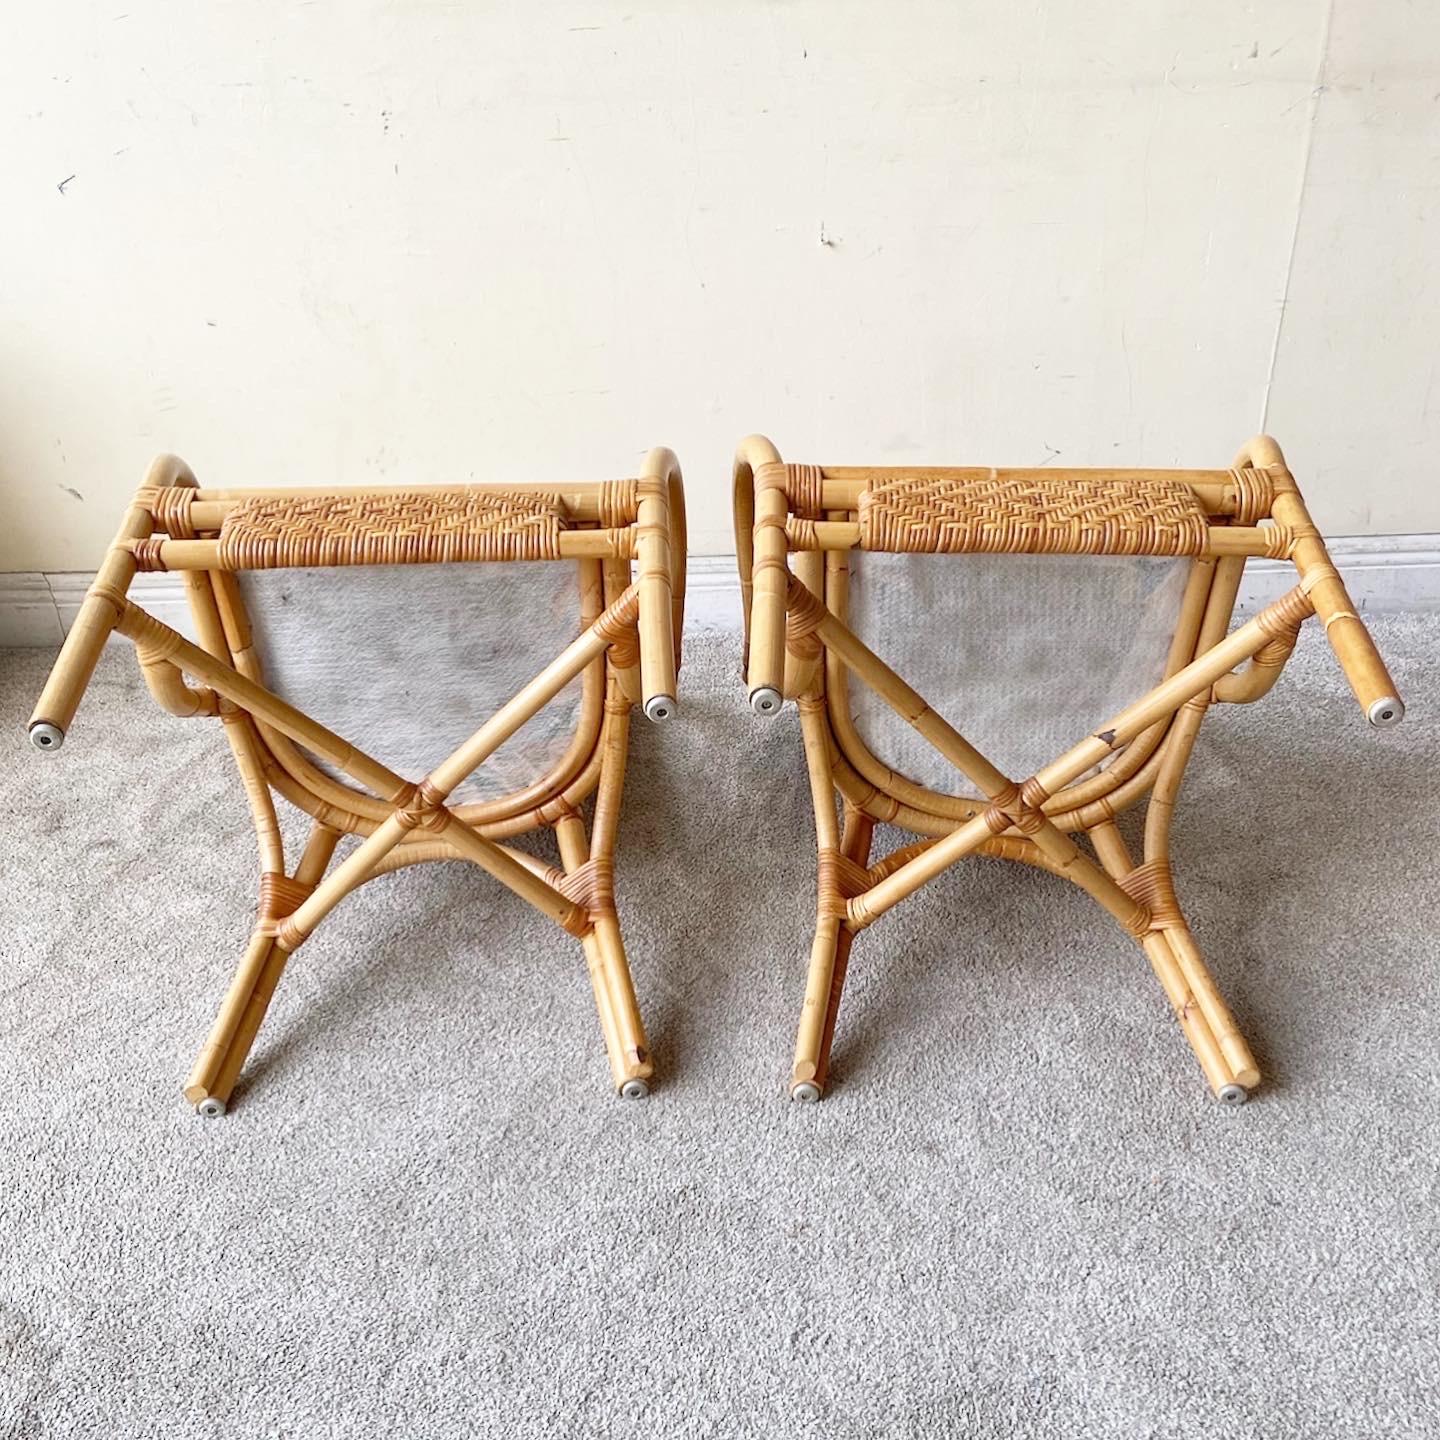 Late 20th Century Boho Chic Bamboo Rattan and Wicker Arm Chairs For Sale